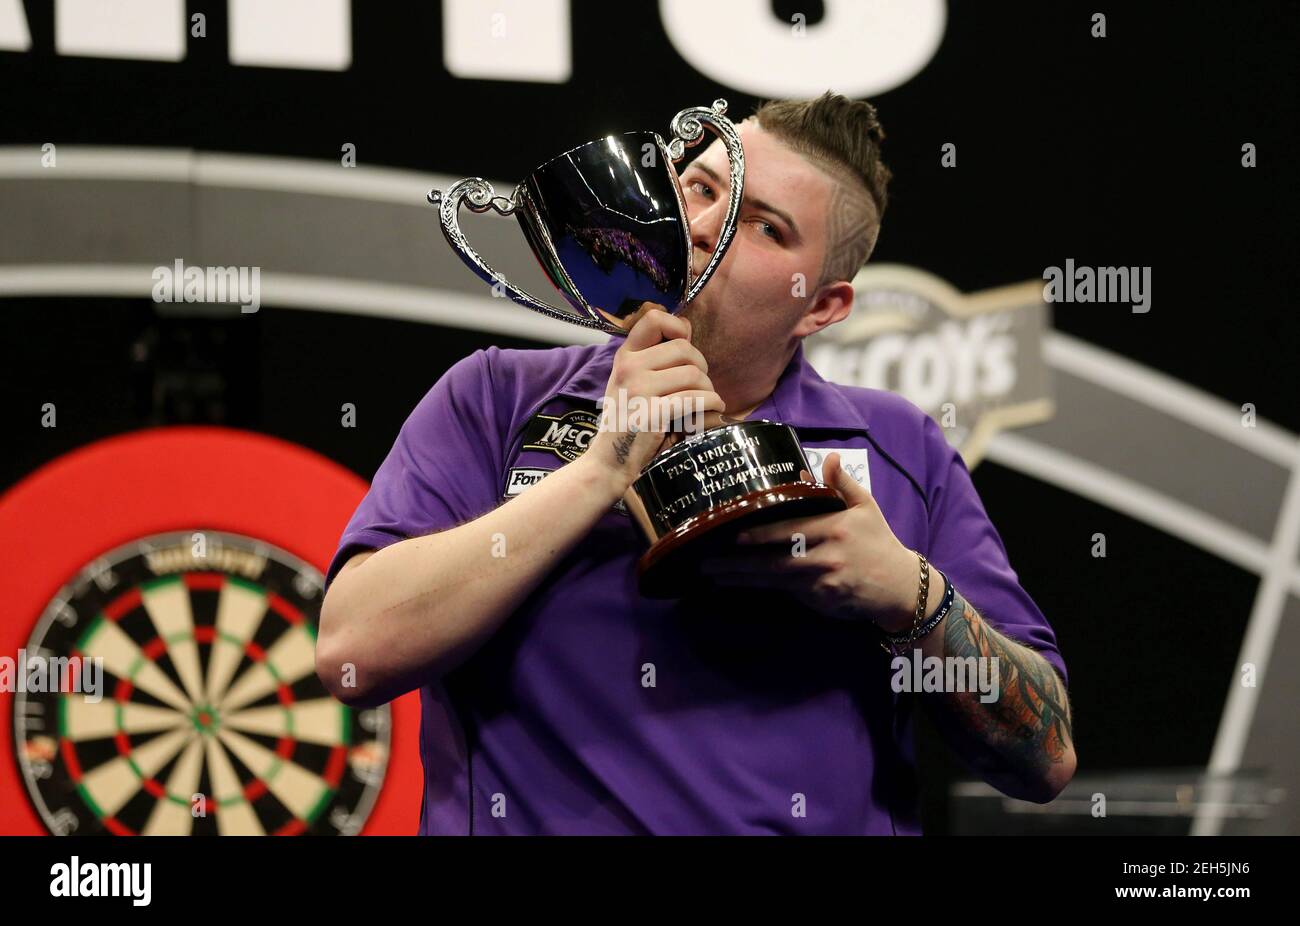 Michael Smith Darts High Resolution Stock Photography and Images - Alamy